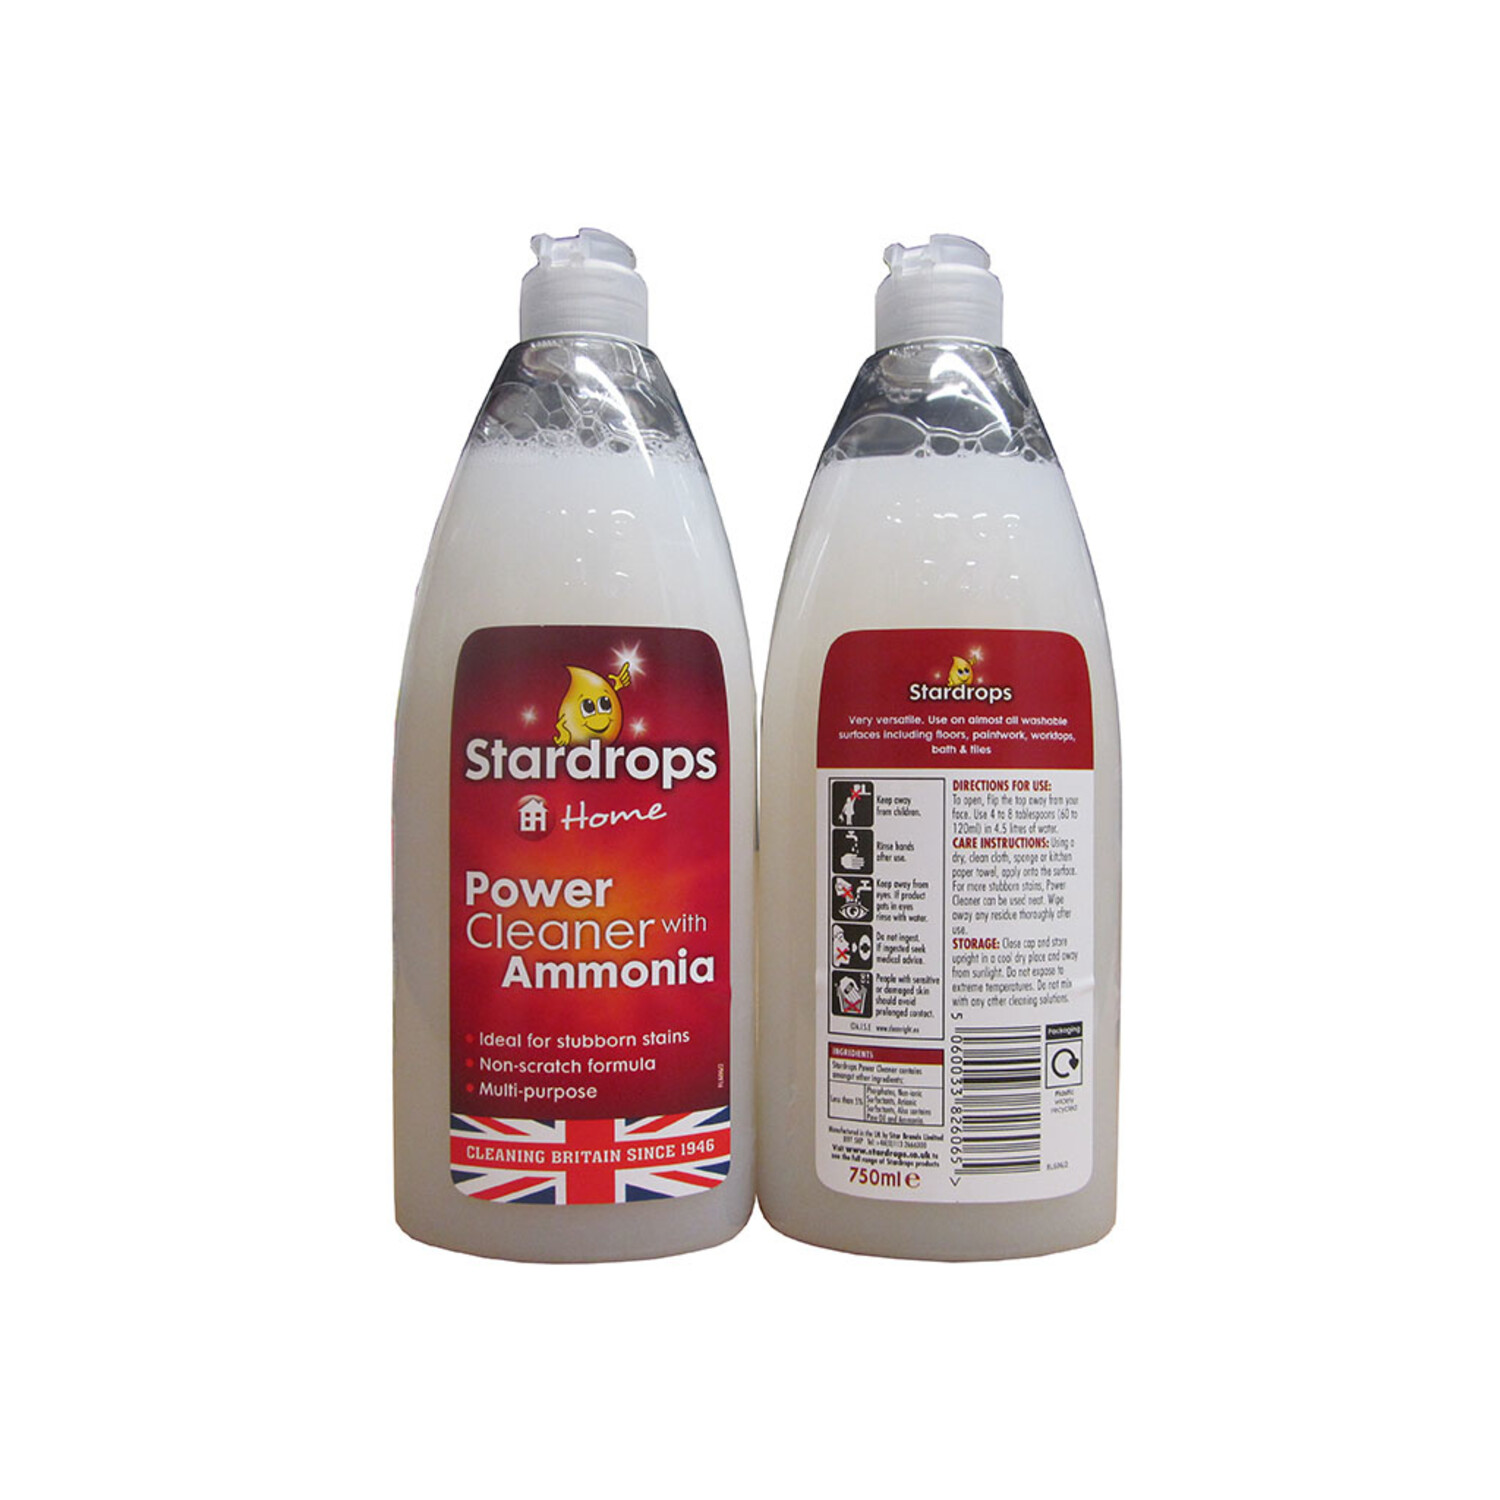 Stardrops Home Power Cleaner with Ammonia 750ml —